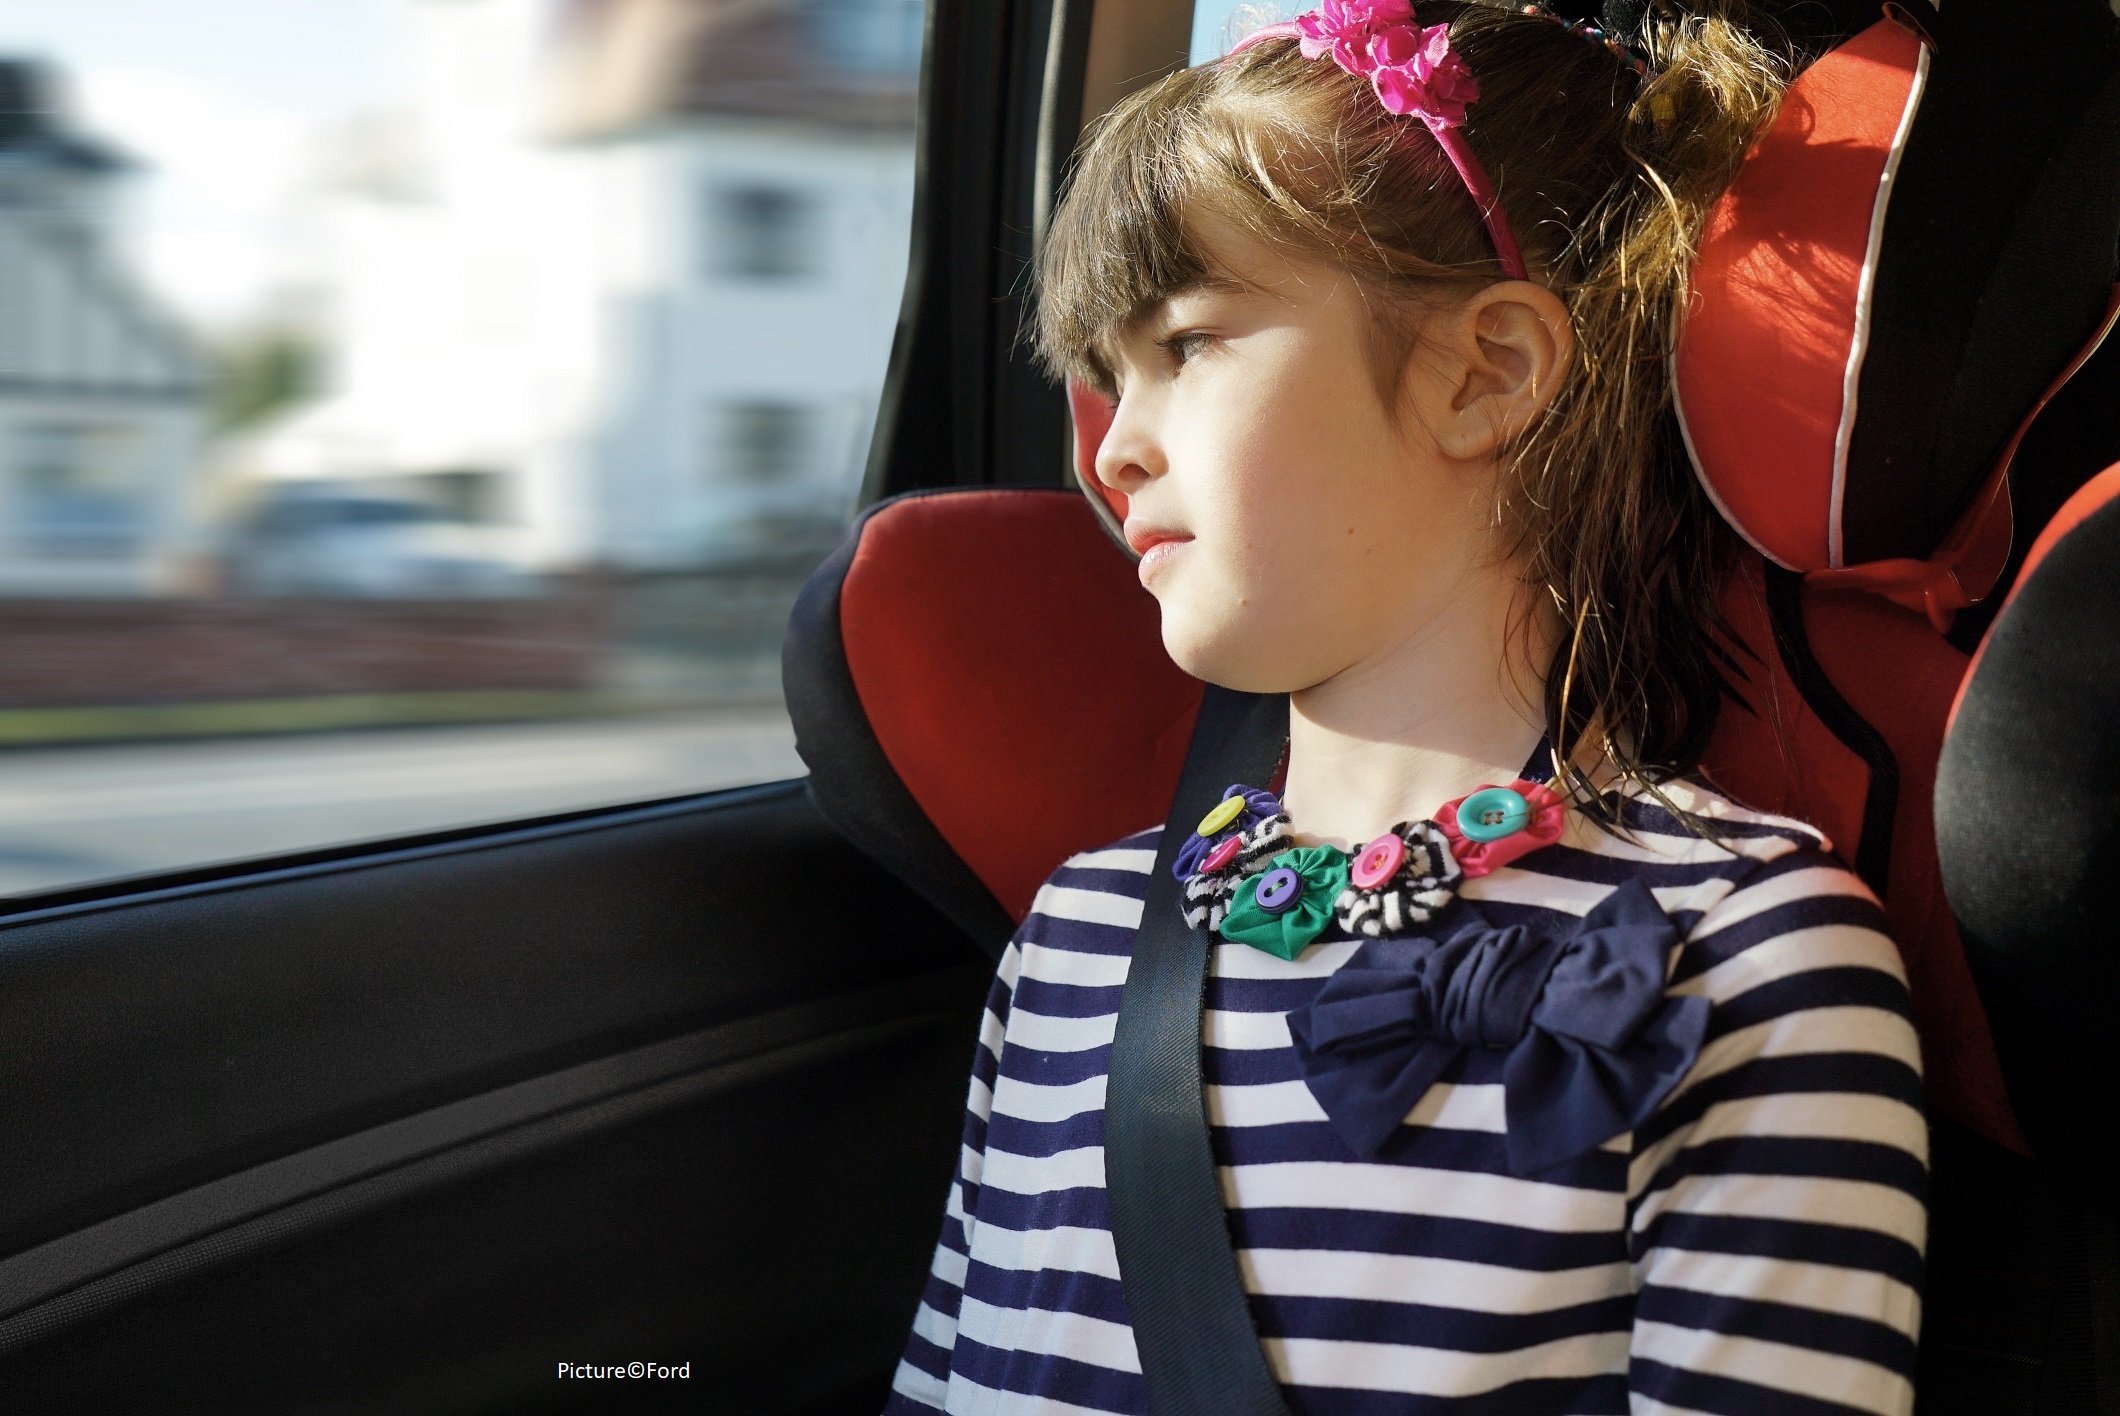 My daughter suffers from motion sickness in cars. What can I do about it?